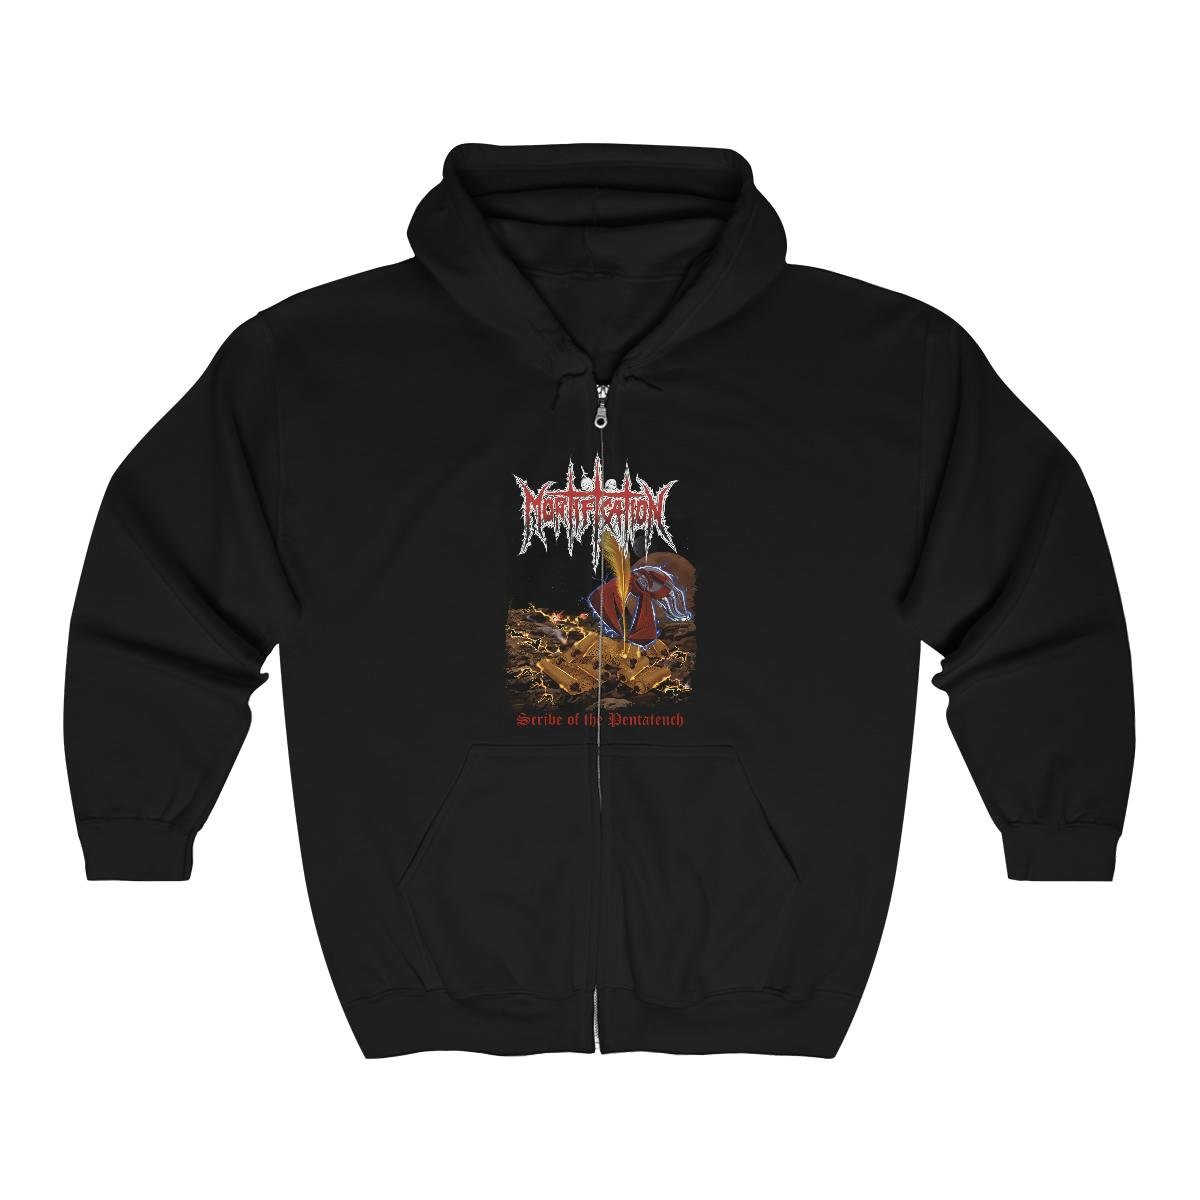 Mortification – Scribe Of The Pentateuch Full Zip Hooded Sweatshirt